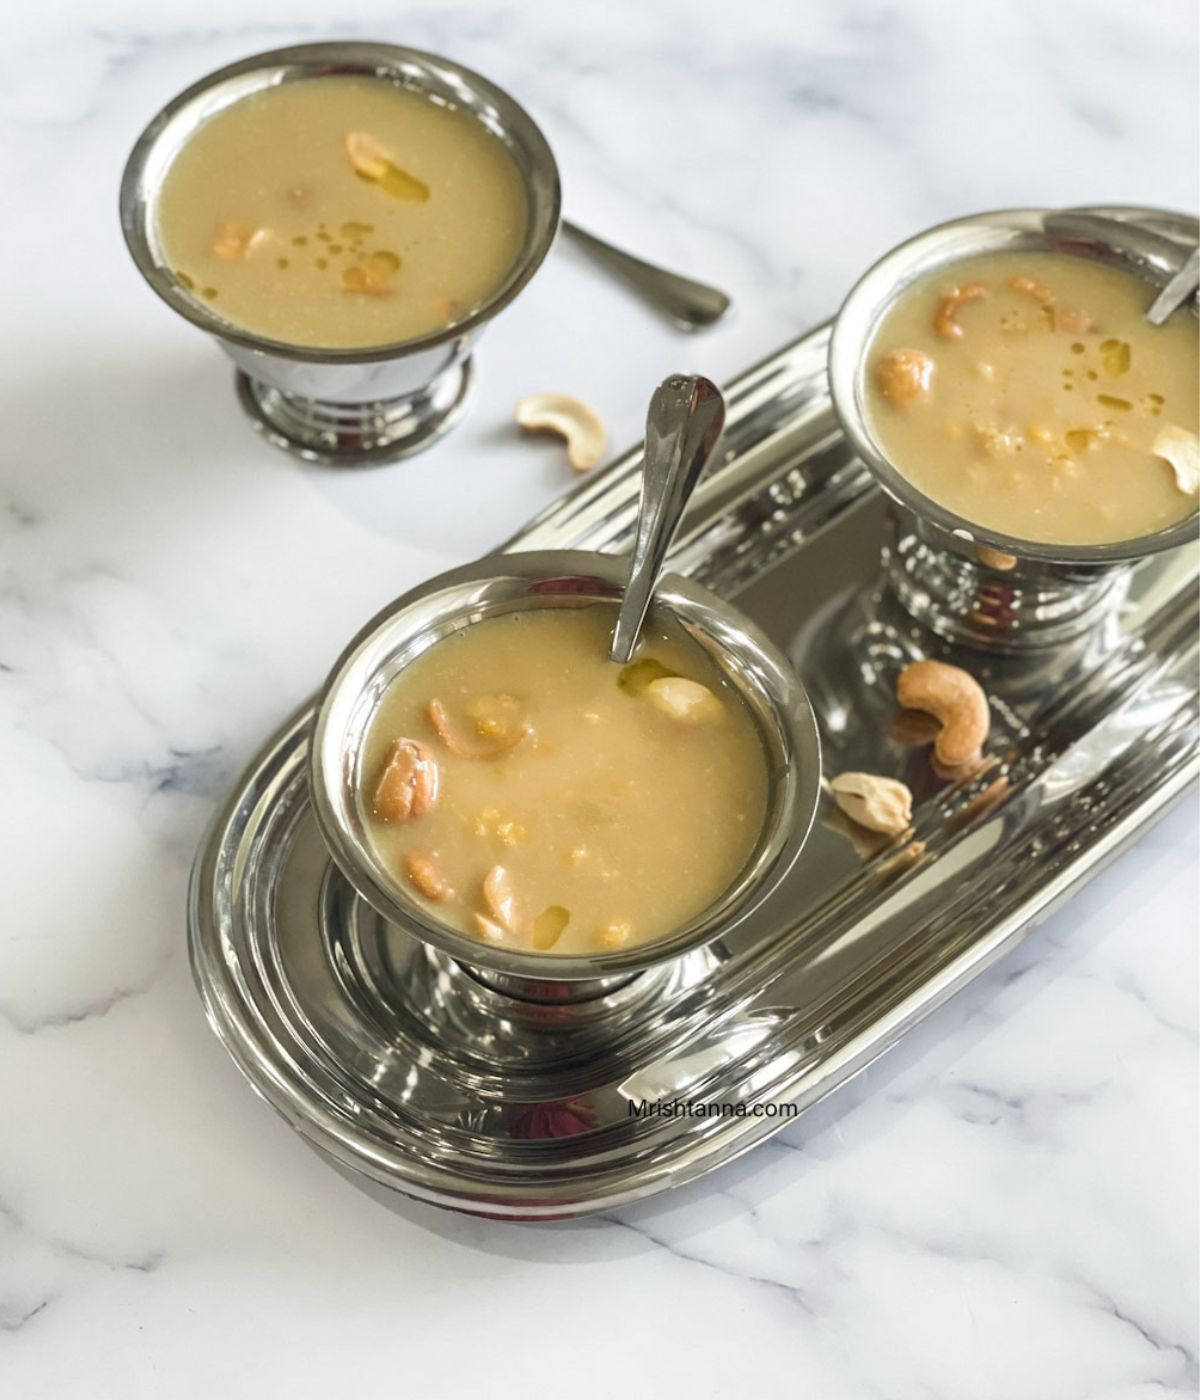 Three stainless steel bowls are with chana dal payasam and topped with roasted cashews.